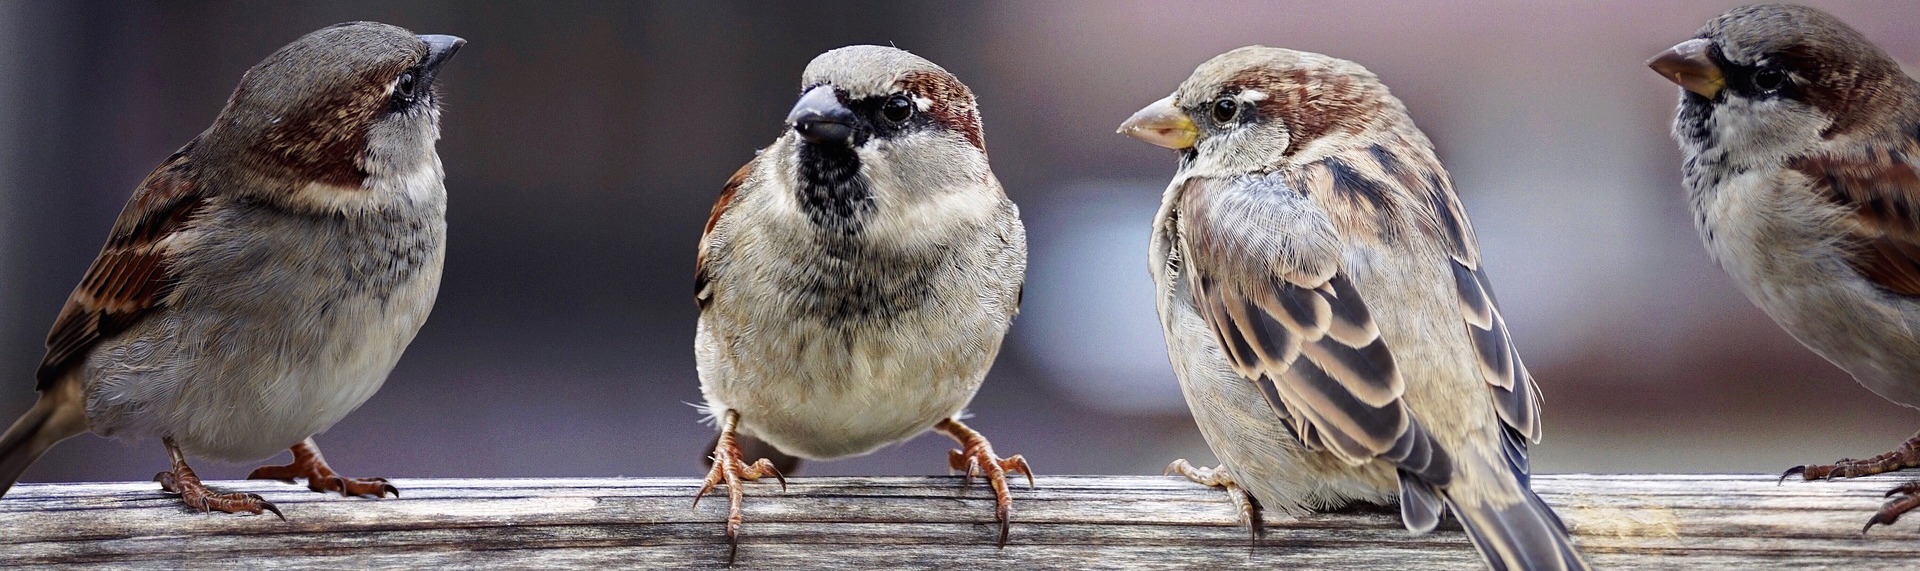 The sparrows seem to be shrinking